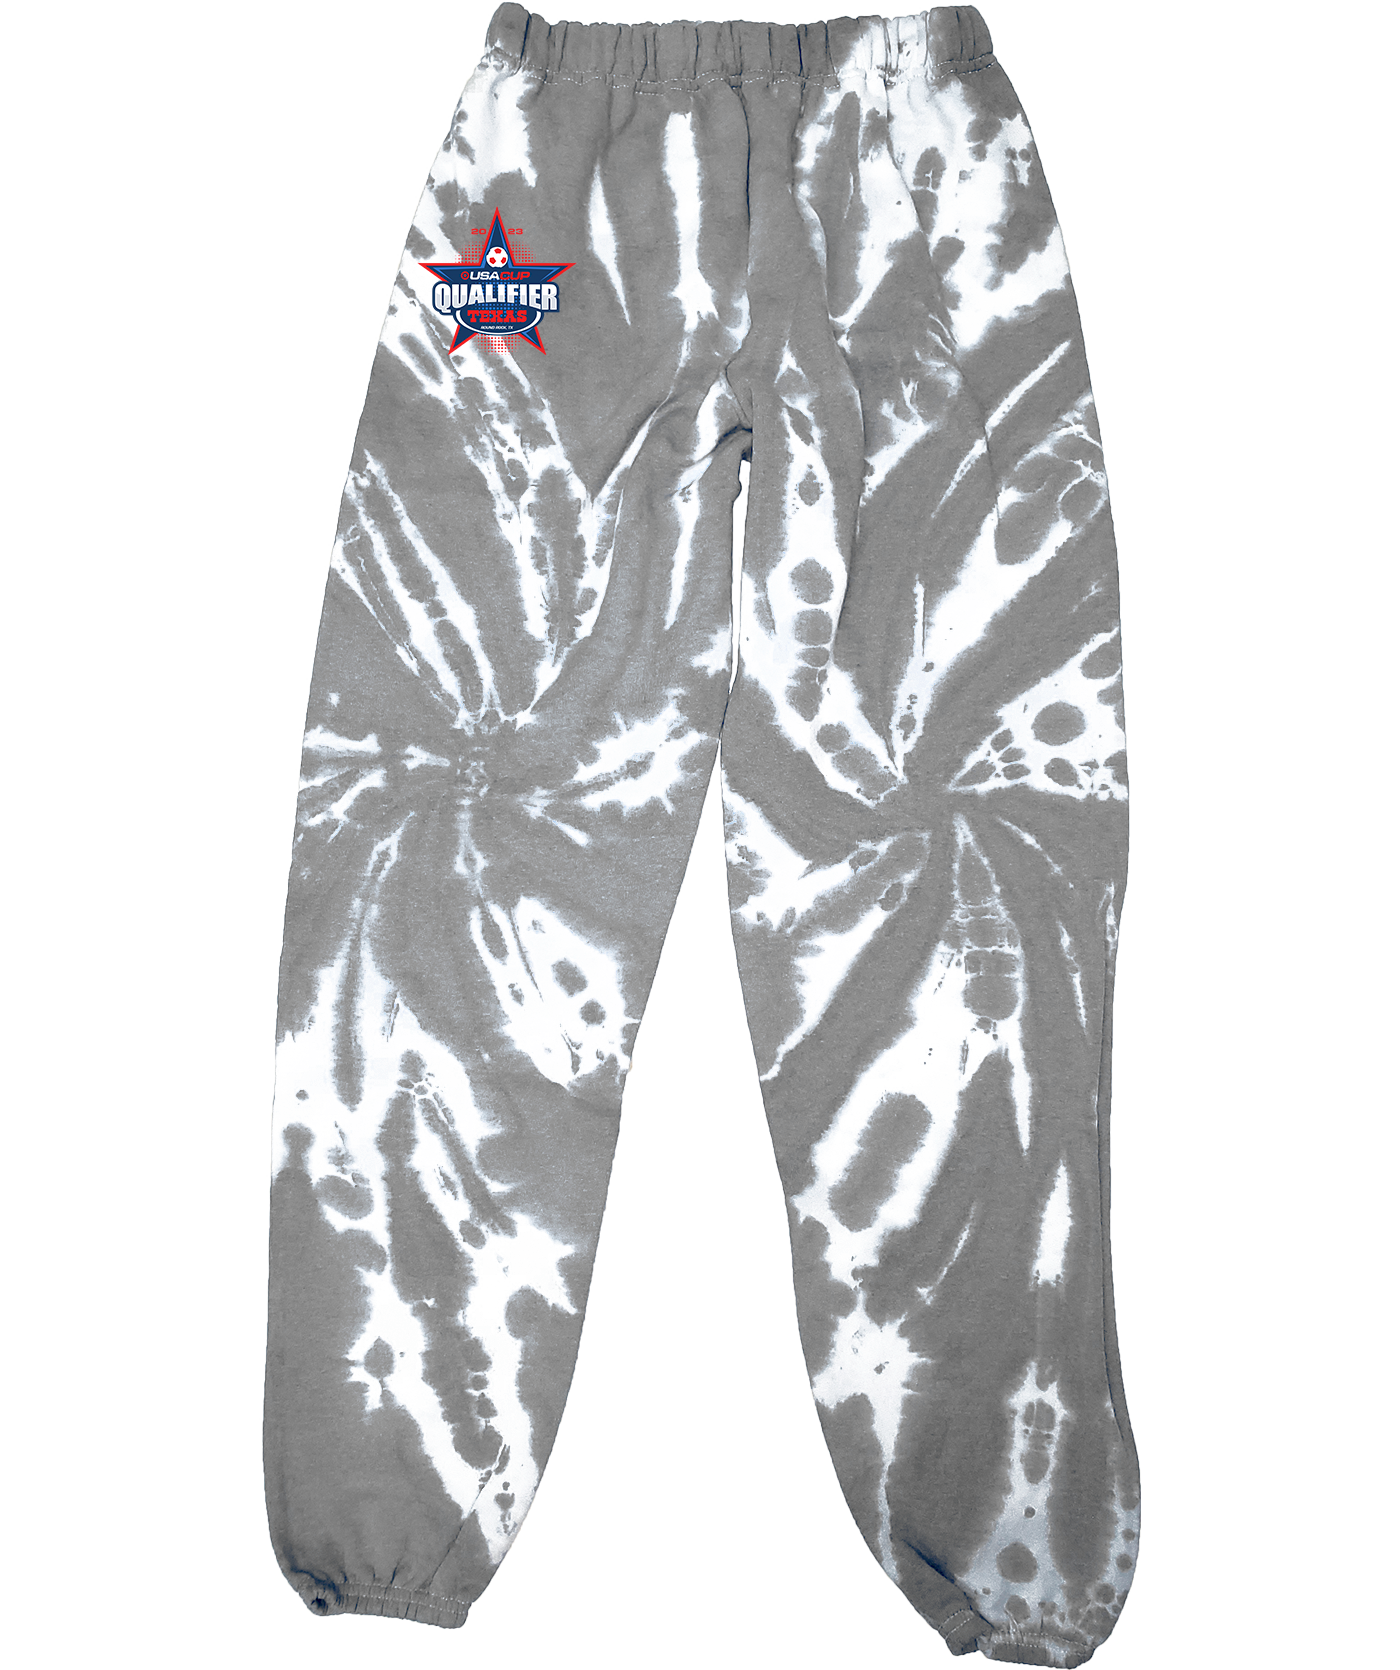 SWEAT PANTS - 2023 USA CUP Qualifier Texas